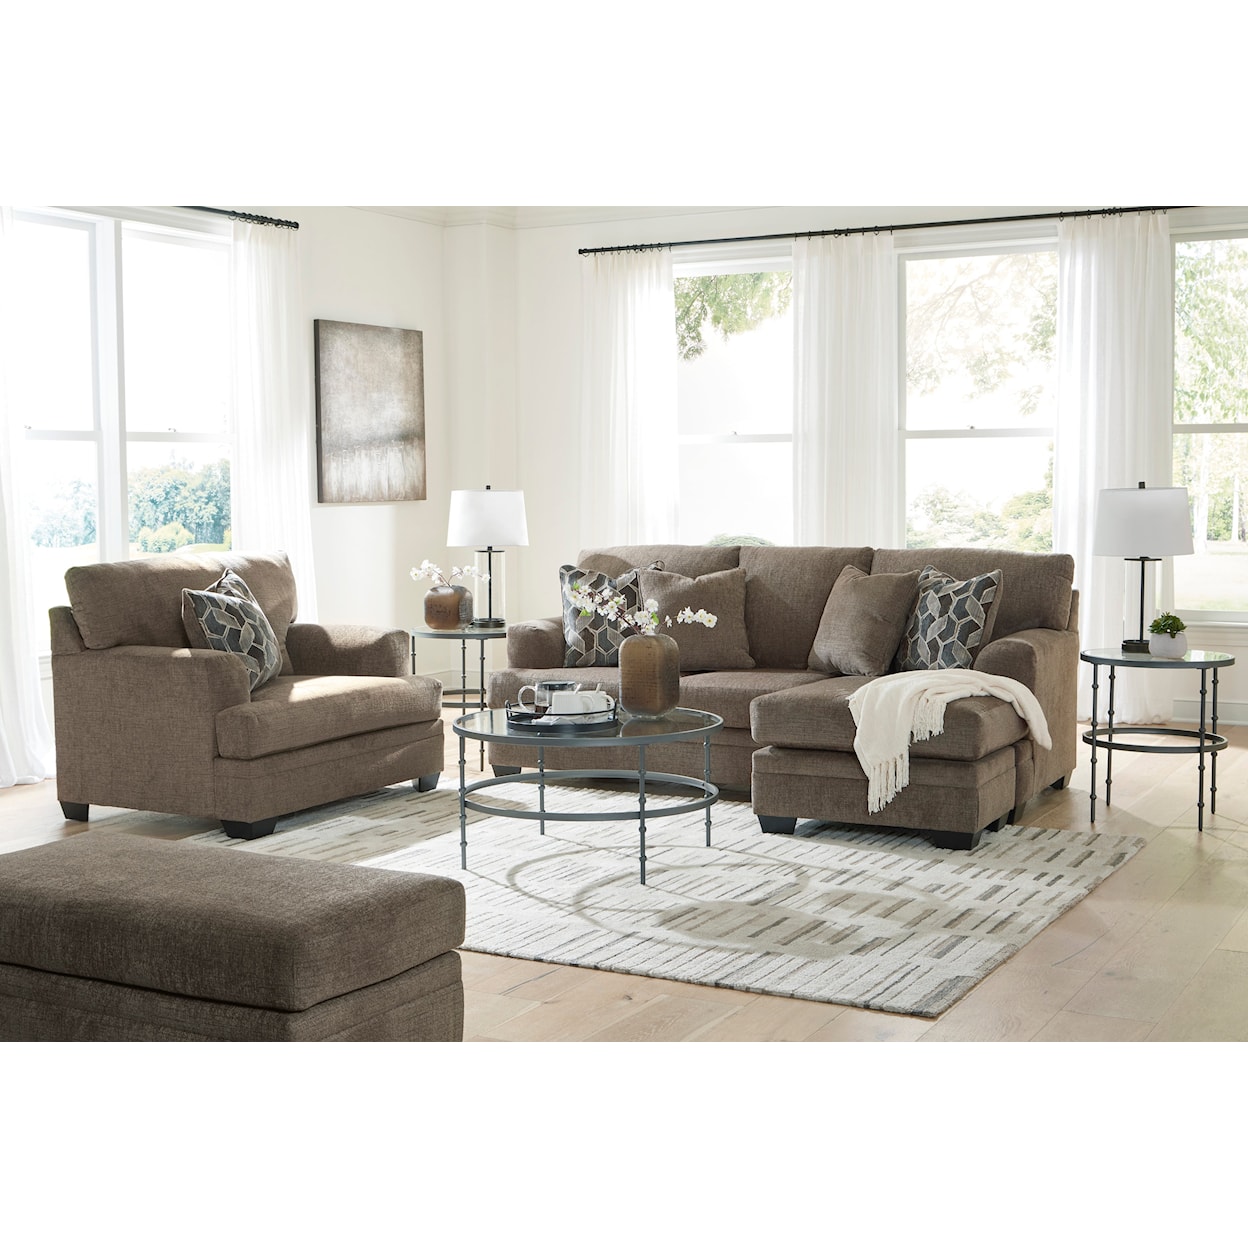 Benchcraft Stonemeade Sofa Chaise, Oversized Chair and Ottoman